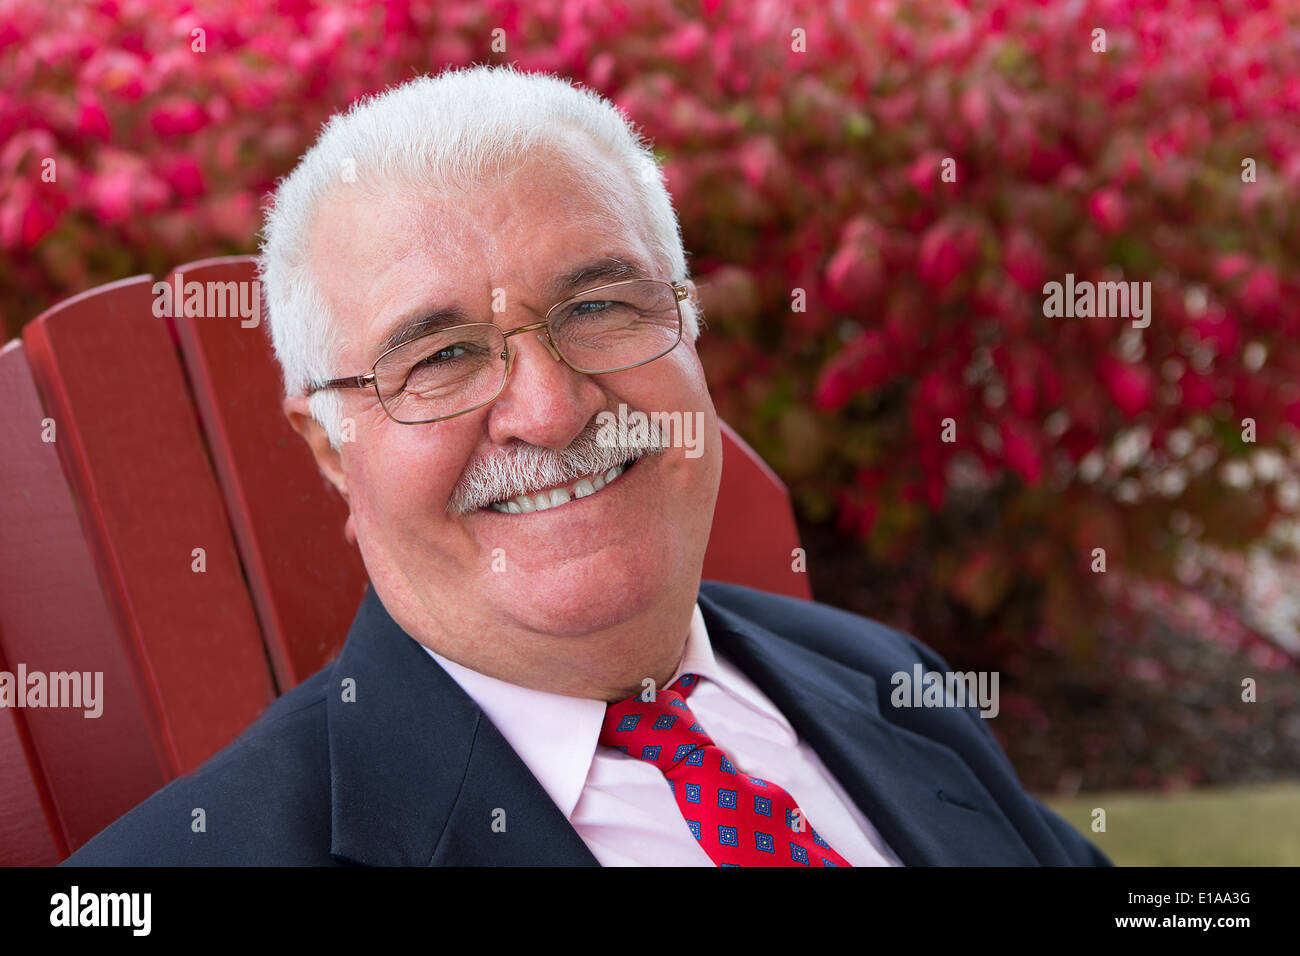 White hair senior businessman outside on a red chair smiling large at you Stock Photo